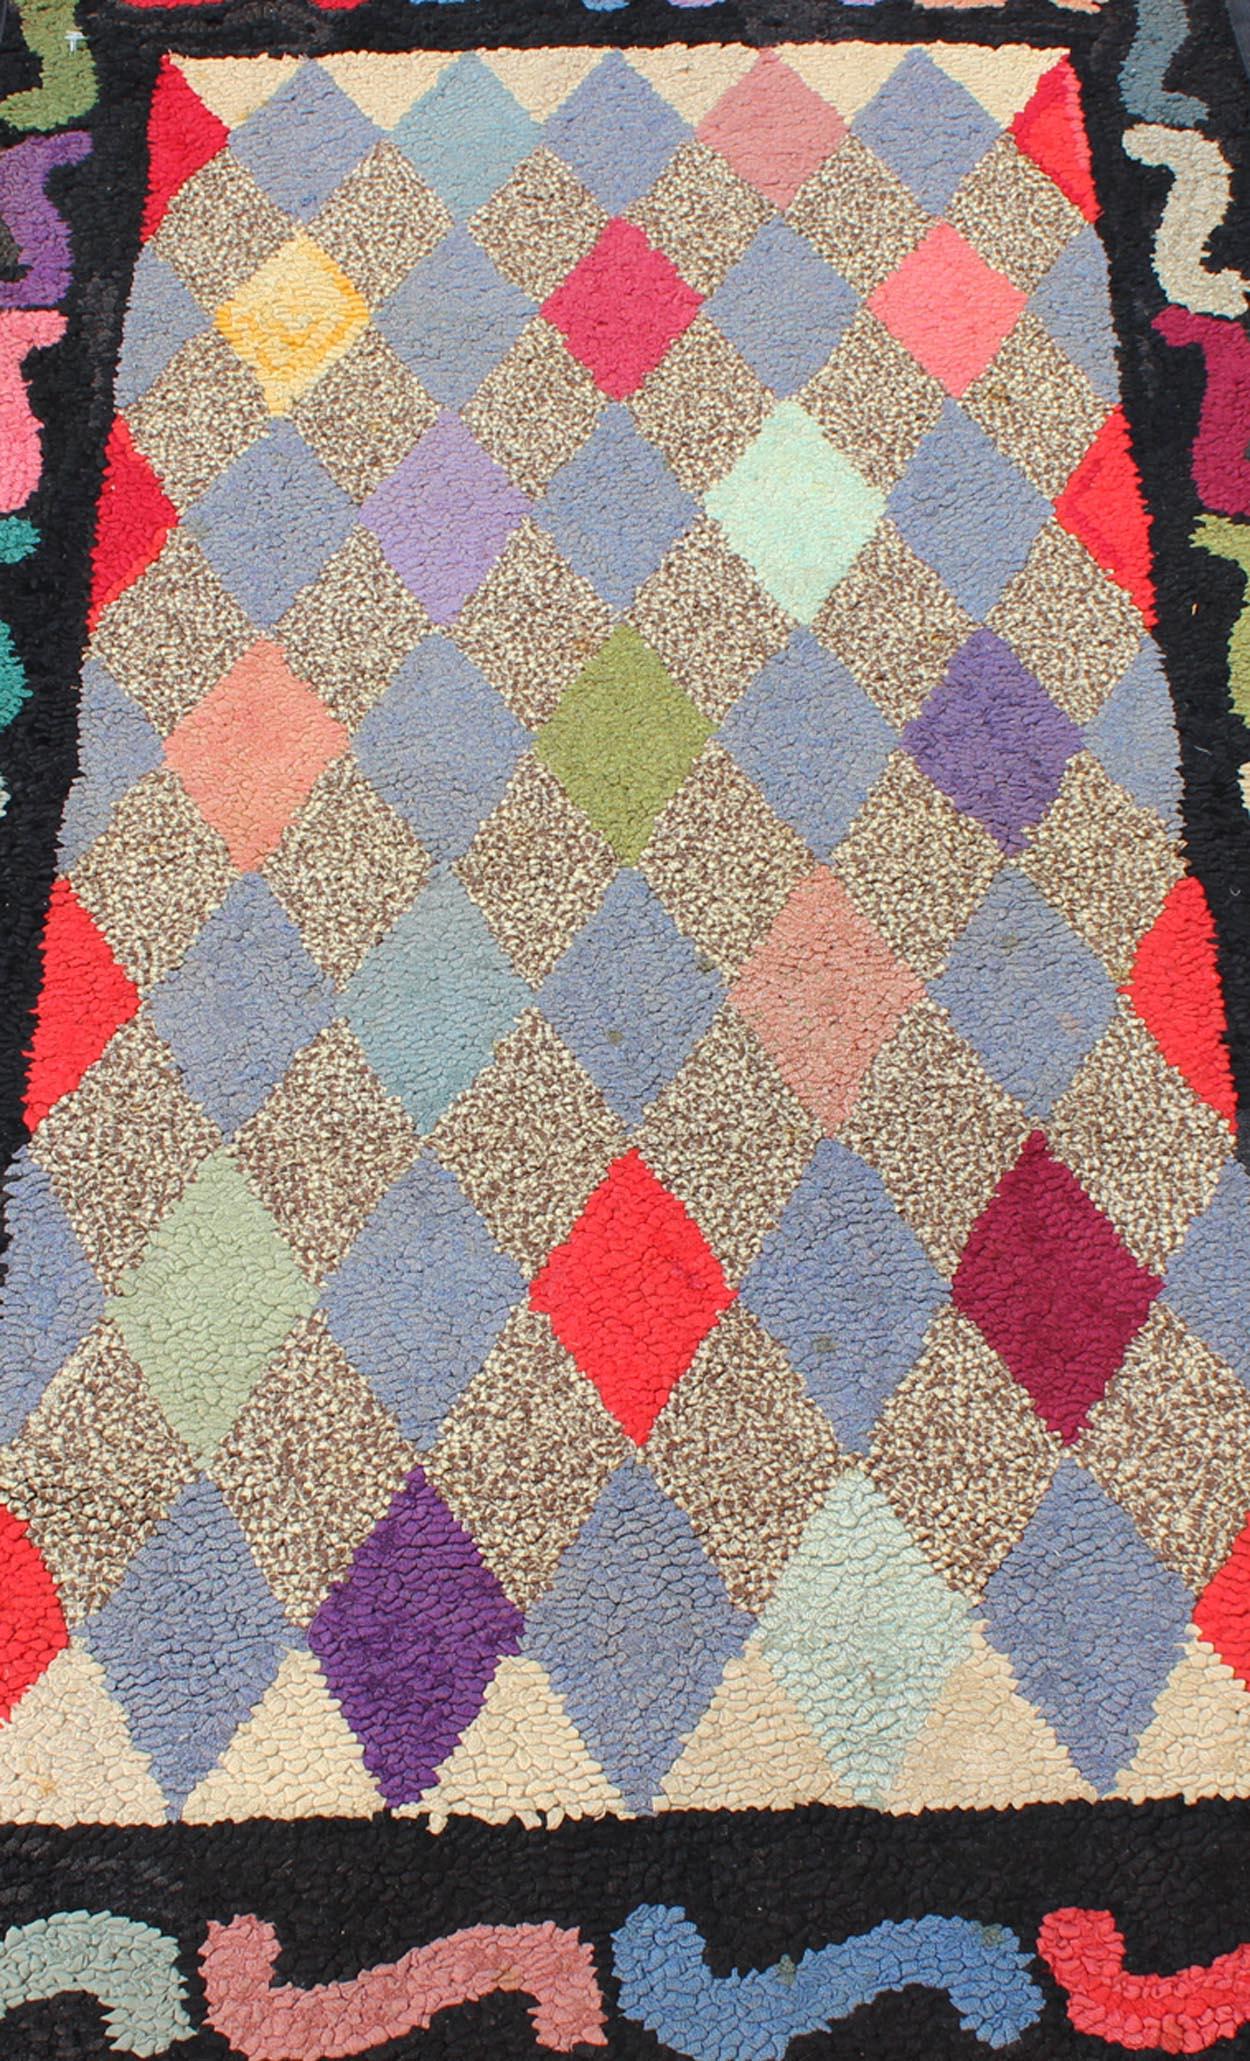 American Hooked Rug with Colorful All-Over Diamond Design with Charcoal Border In Good Condition For Sale In Atlanta, GA